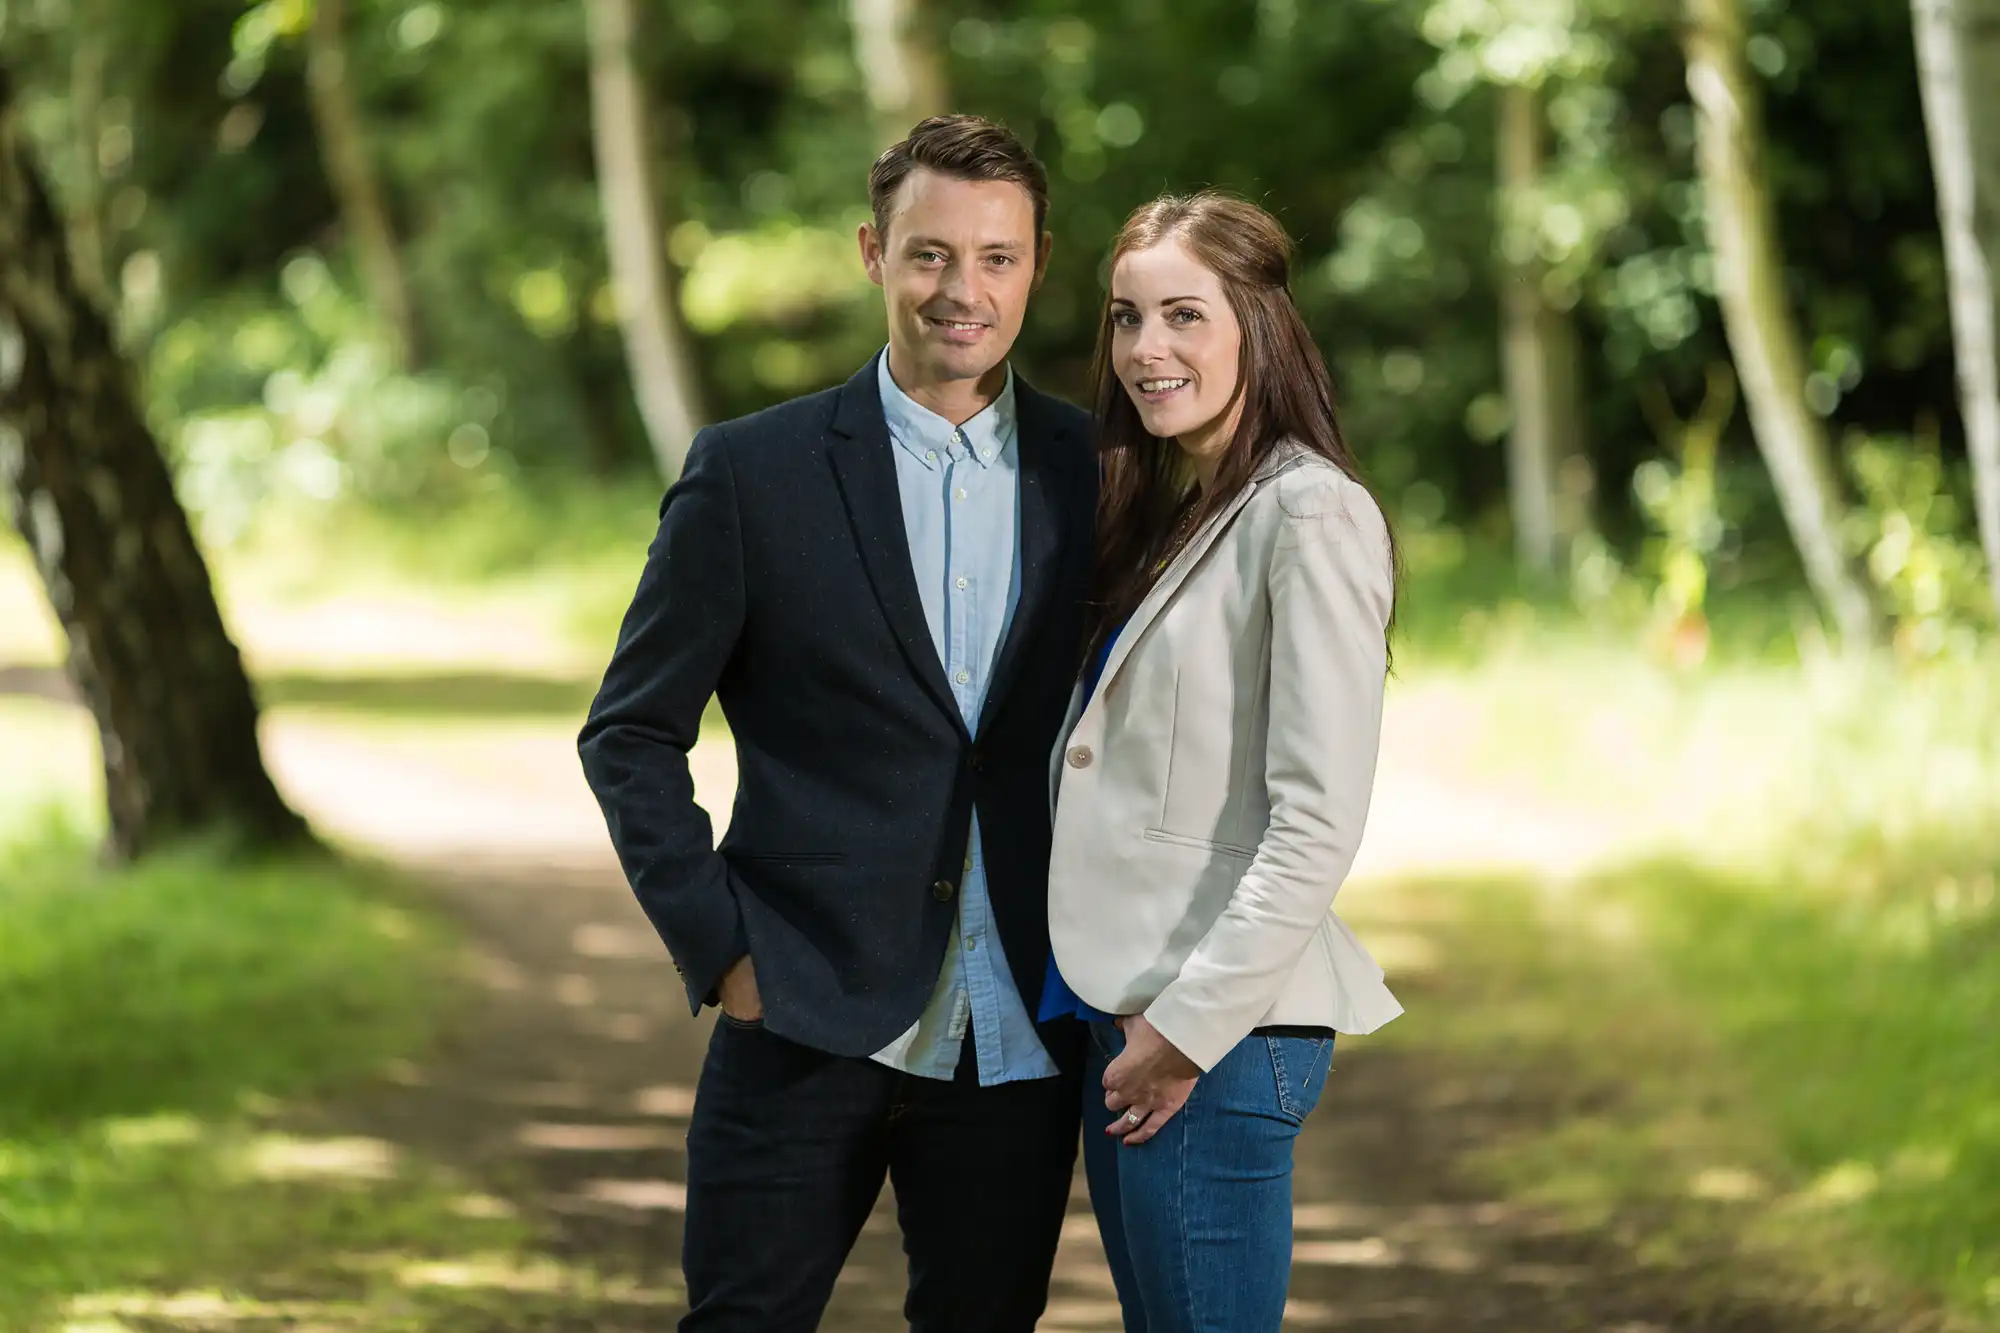 A man and a woman standing together on a forest path, both smiling at the camera. the man wears a blue blazer, and the woman is in a white jacket and jeans.